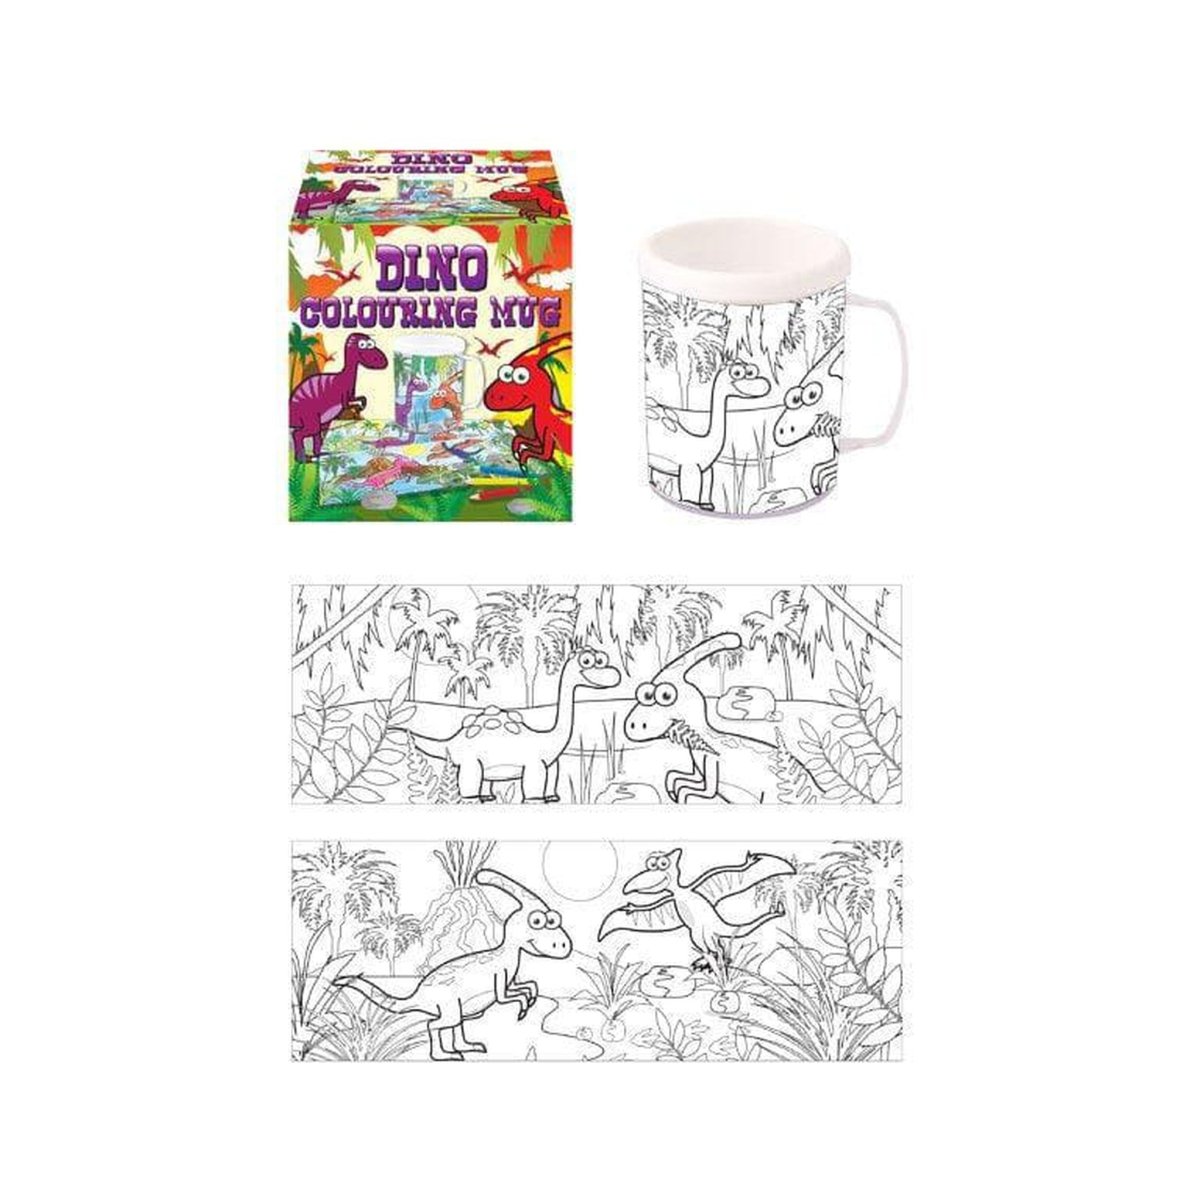 Dinosaur Colouring Mug with 2 Assorted Designs - Kids Party Craft